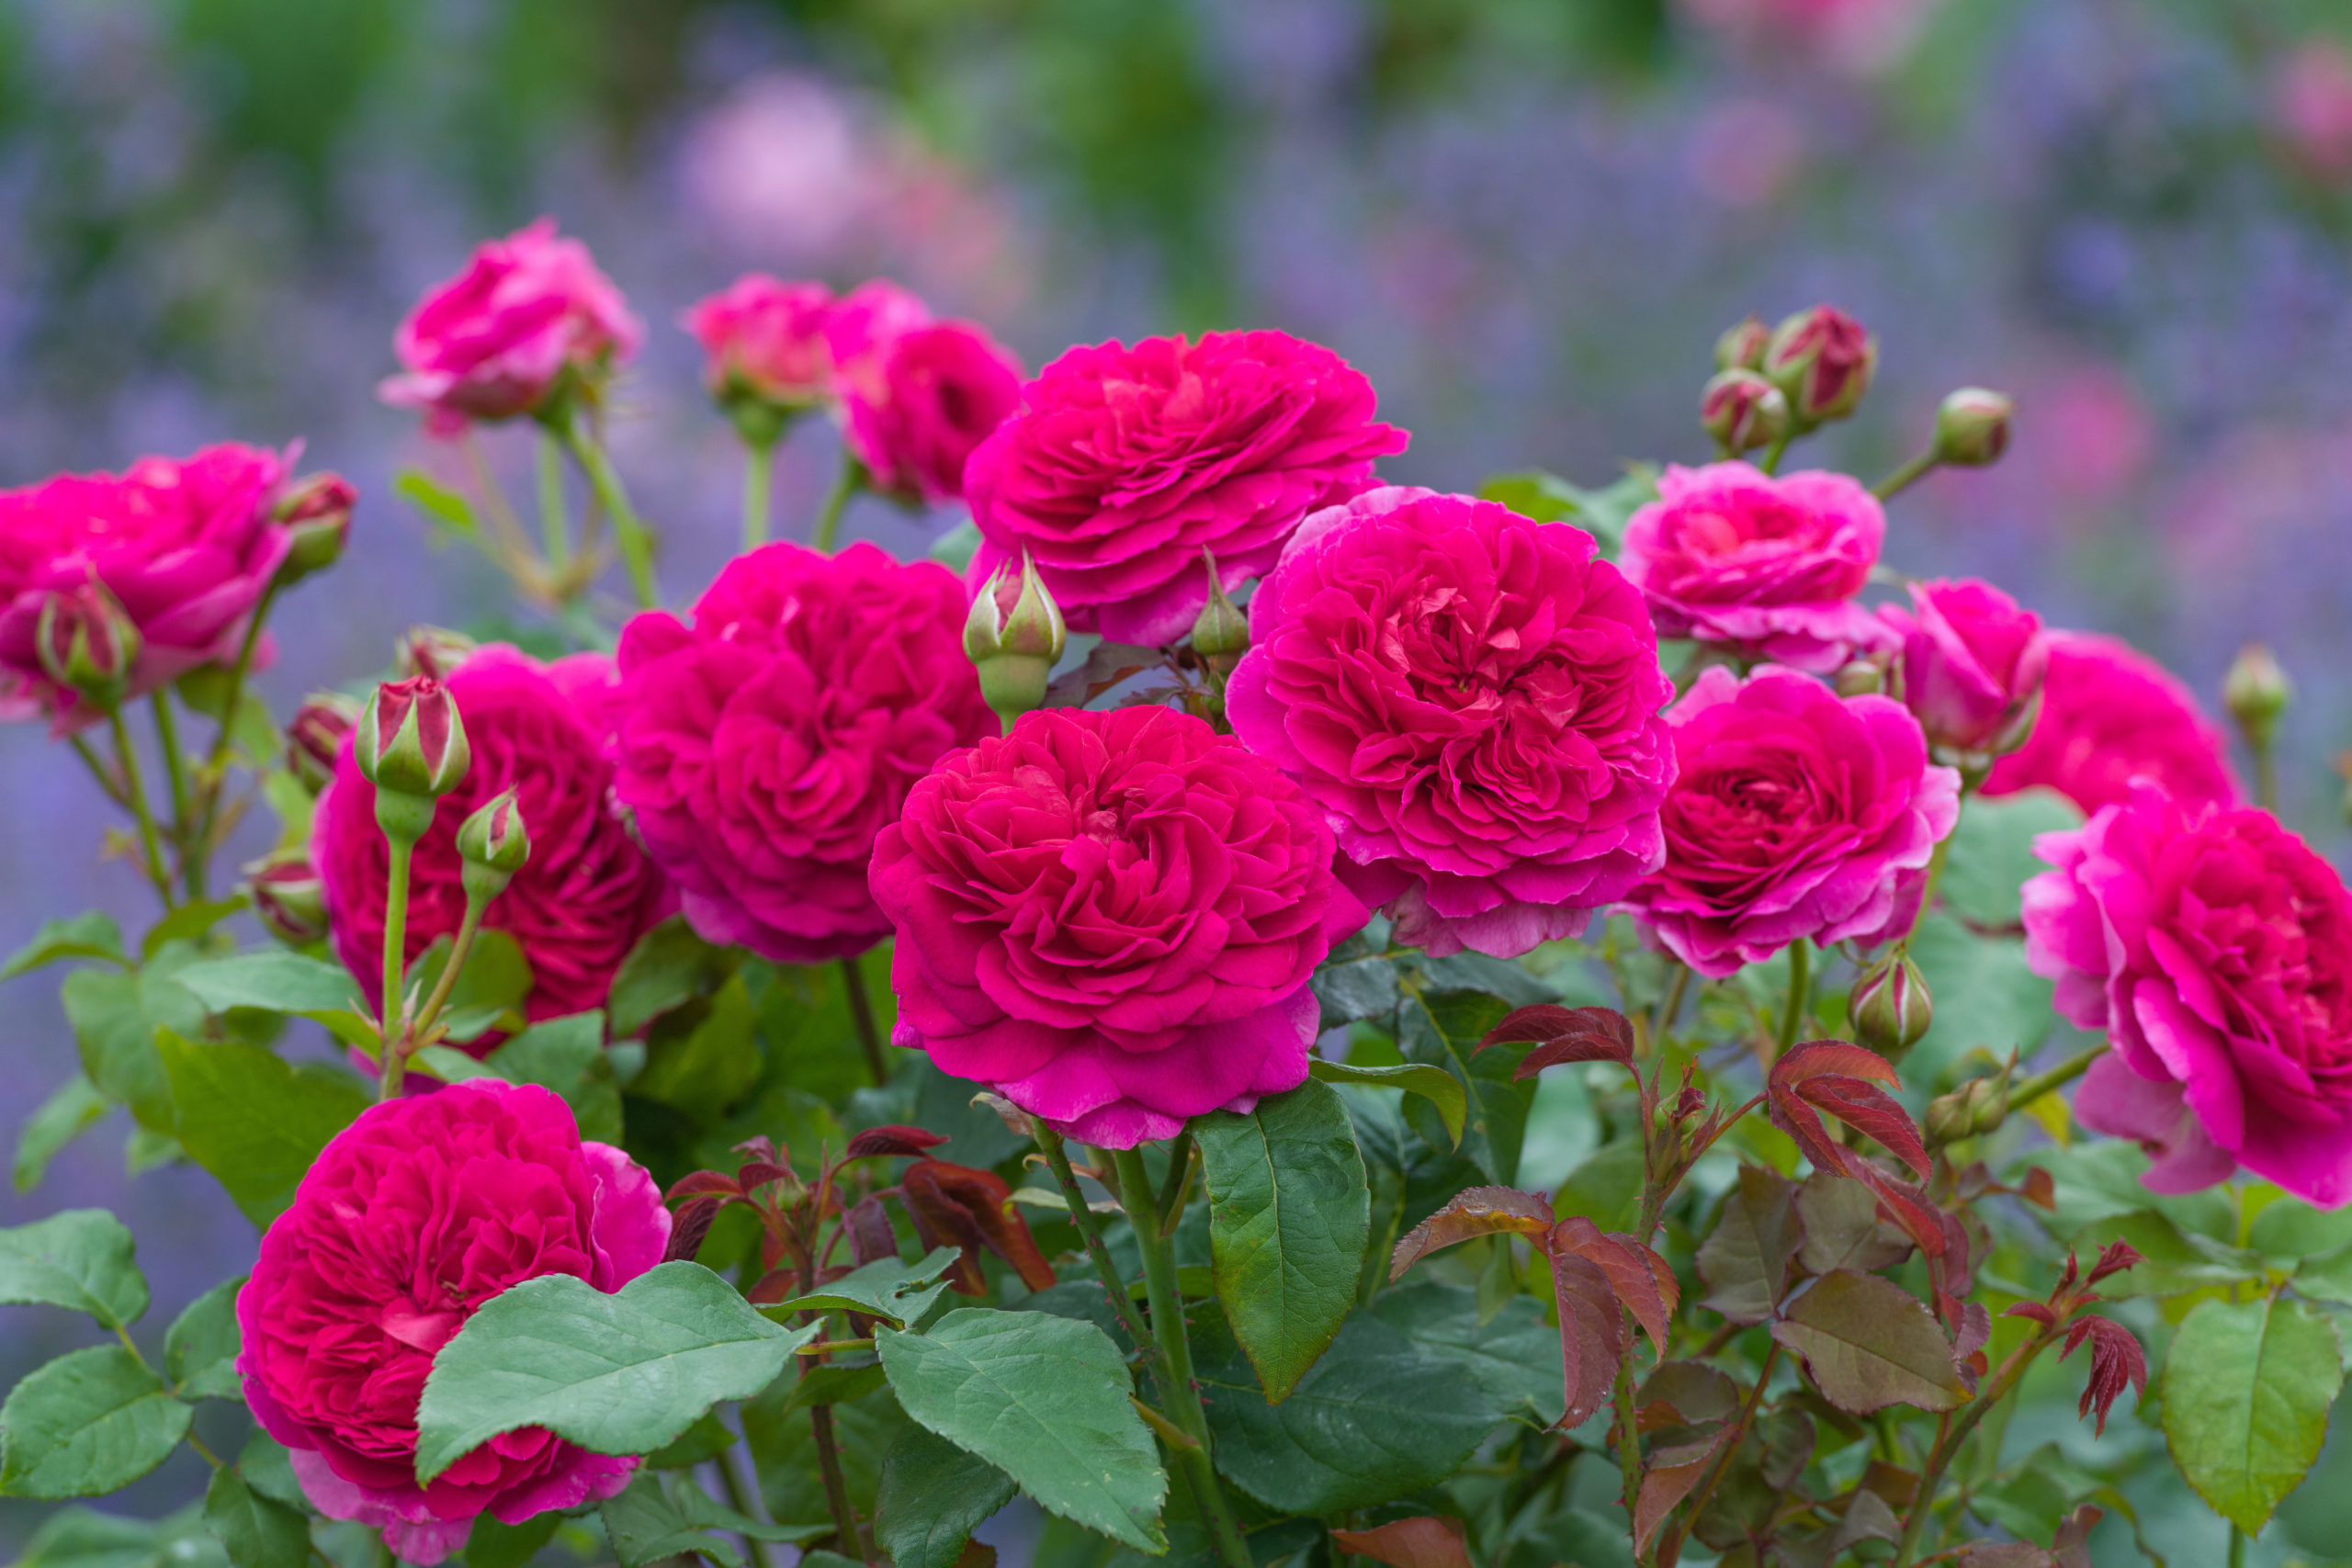 This new English rose from David Austin Roses grows to about 4 feet tall and 4 feet wide. With good disease resistance, great color and fragrance, it should do well in Hamptons gardens.